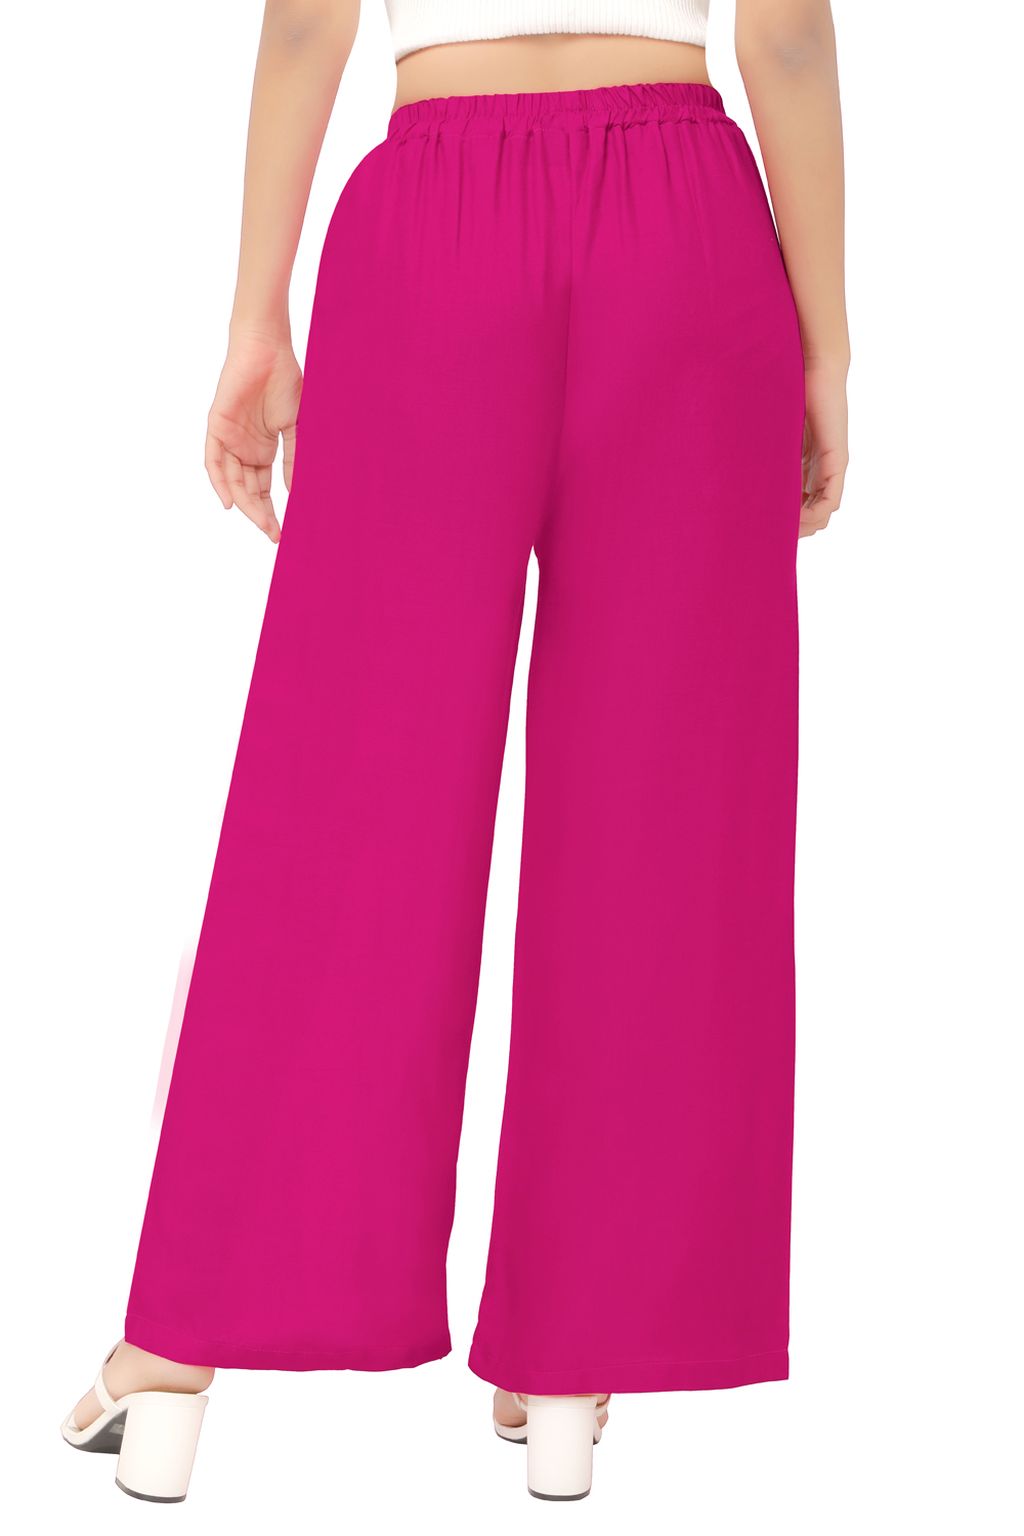 Buy SBF MART Women's Bottom Ethnic Wear Palazzo Trousers - 6 Pieces,  Multicolor, Free Size at Amazon.in